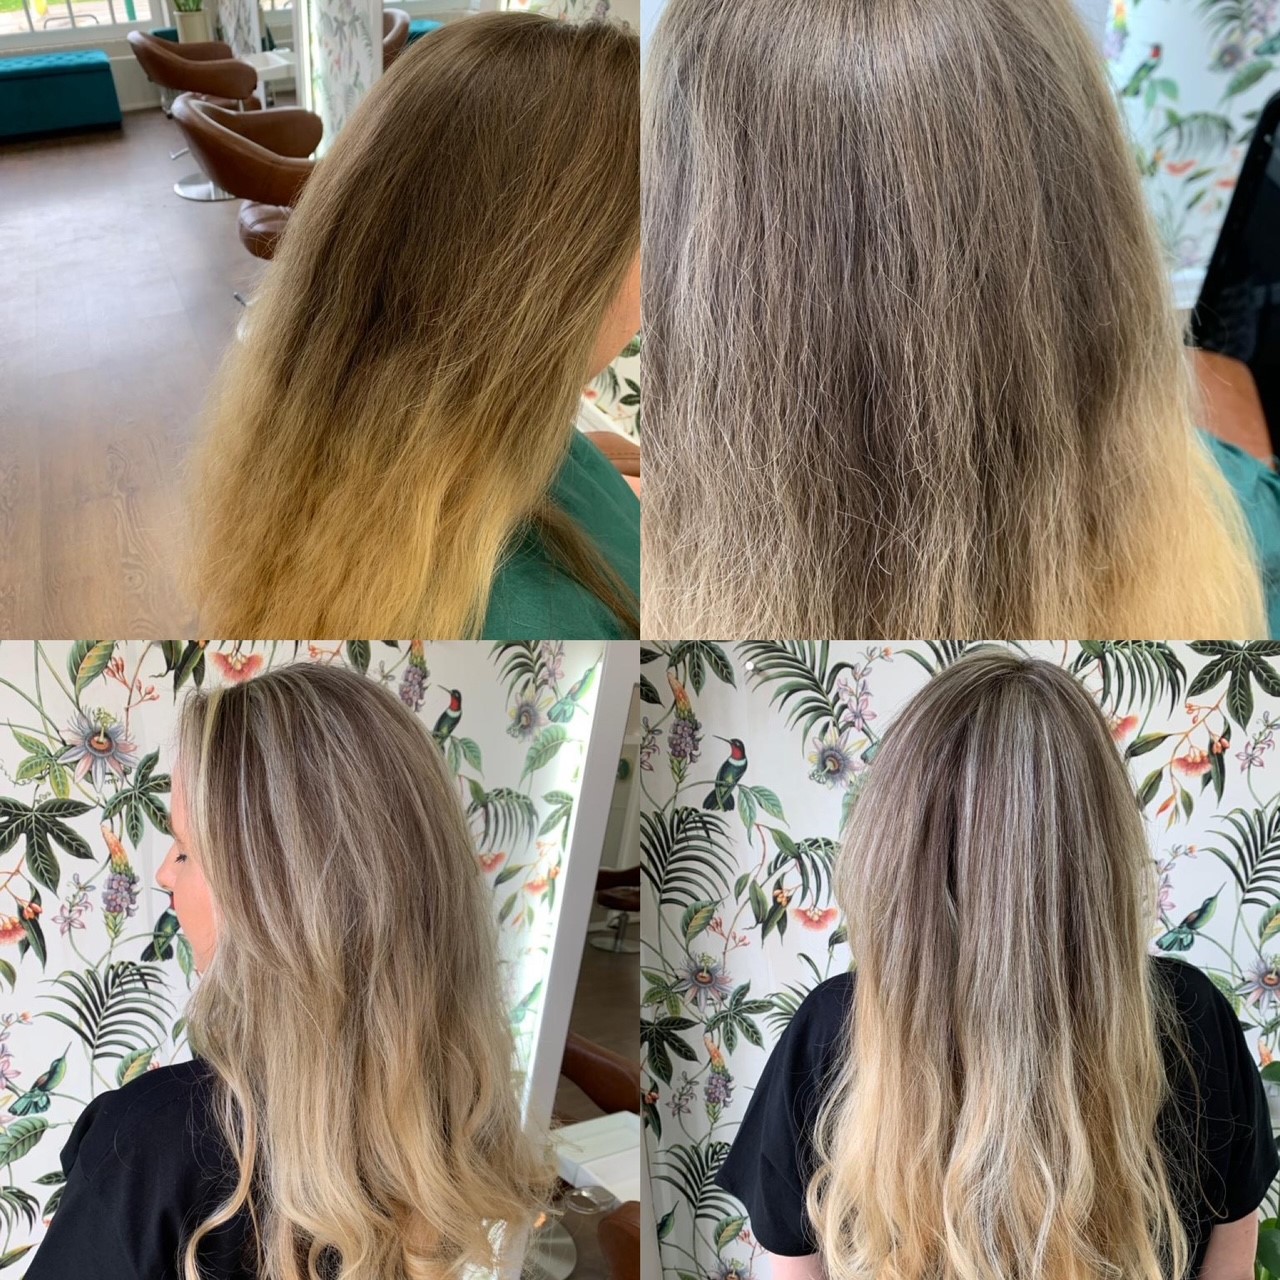 Highlights and classic blow dry